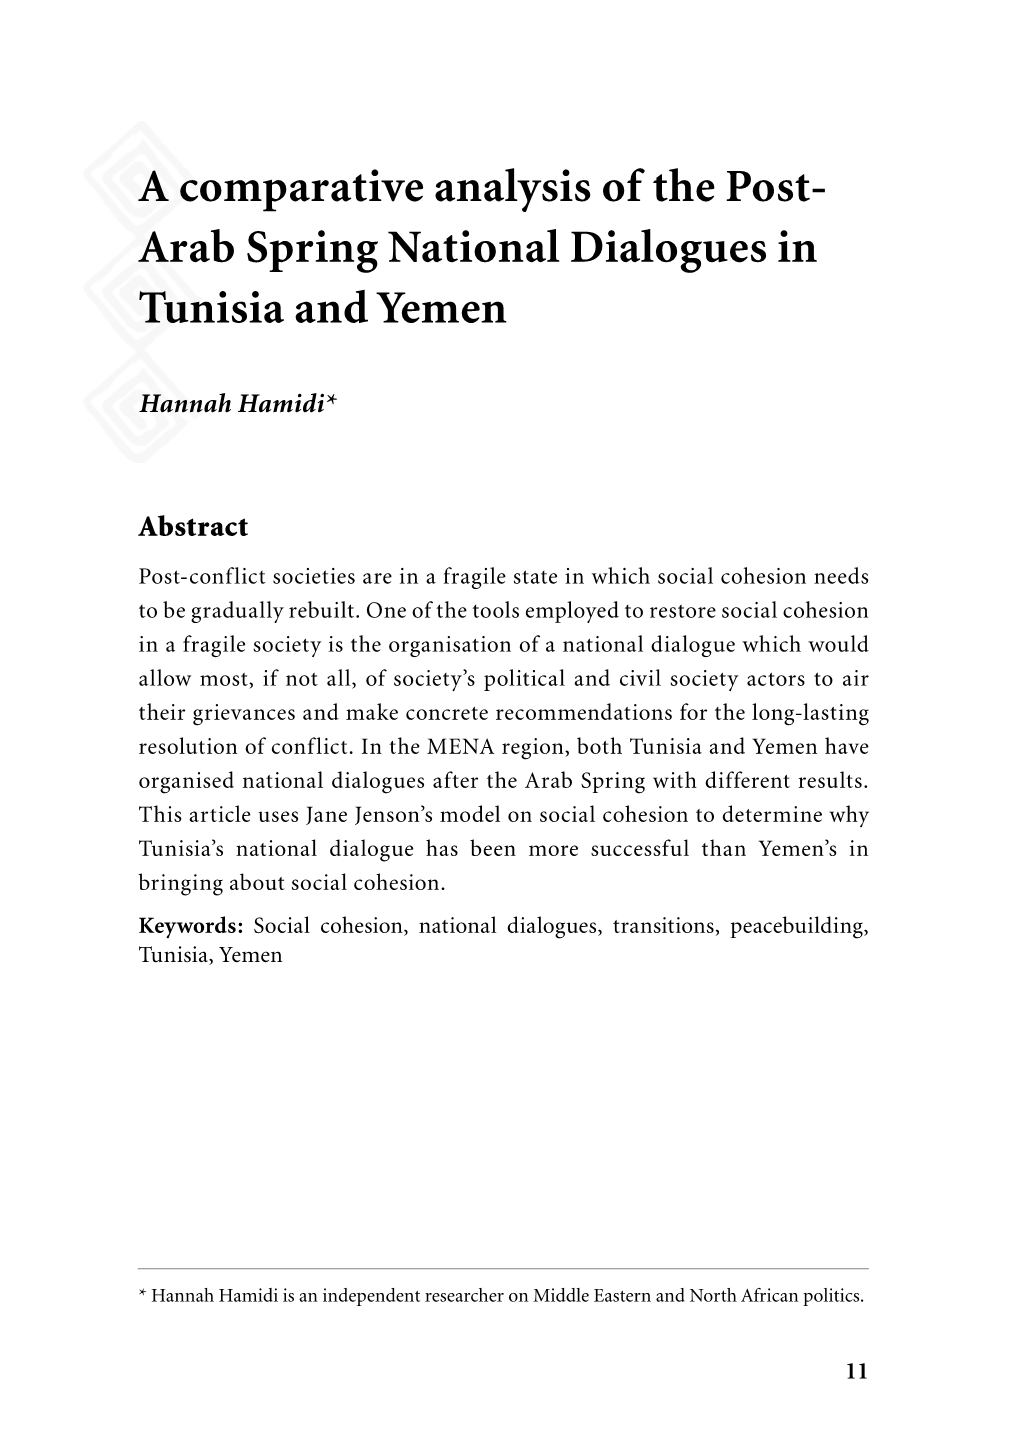 A Comparative Analysis of the Post- Arab Spring National Dialogues in Tunisia and Yemen